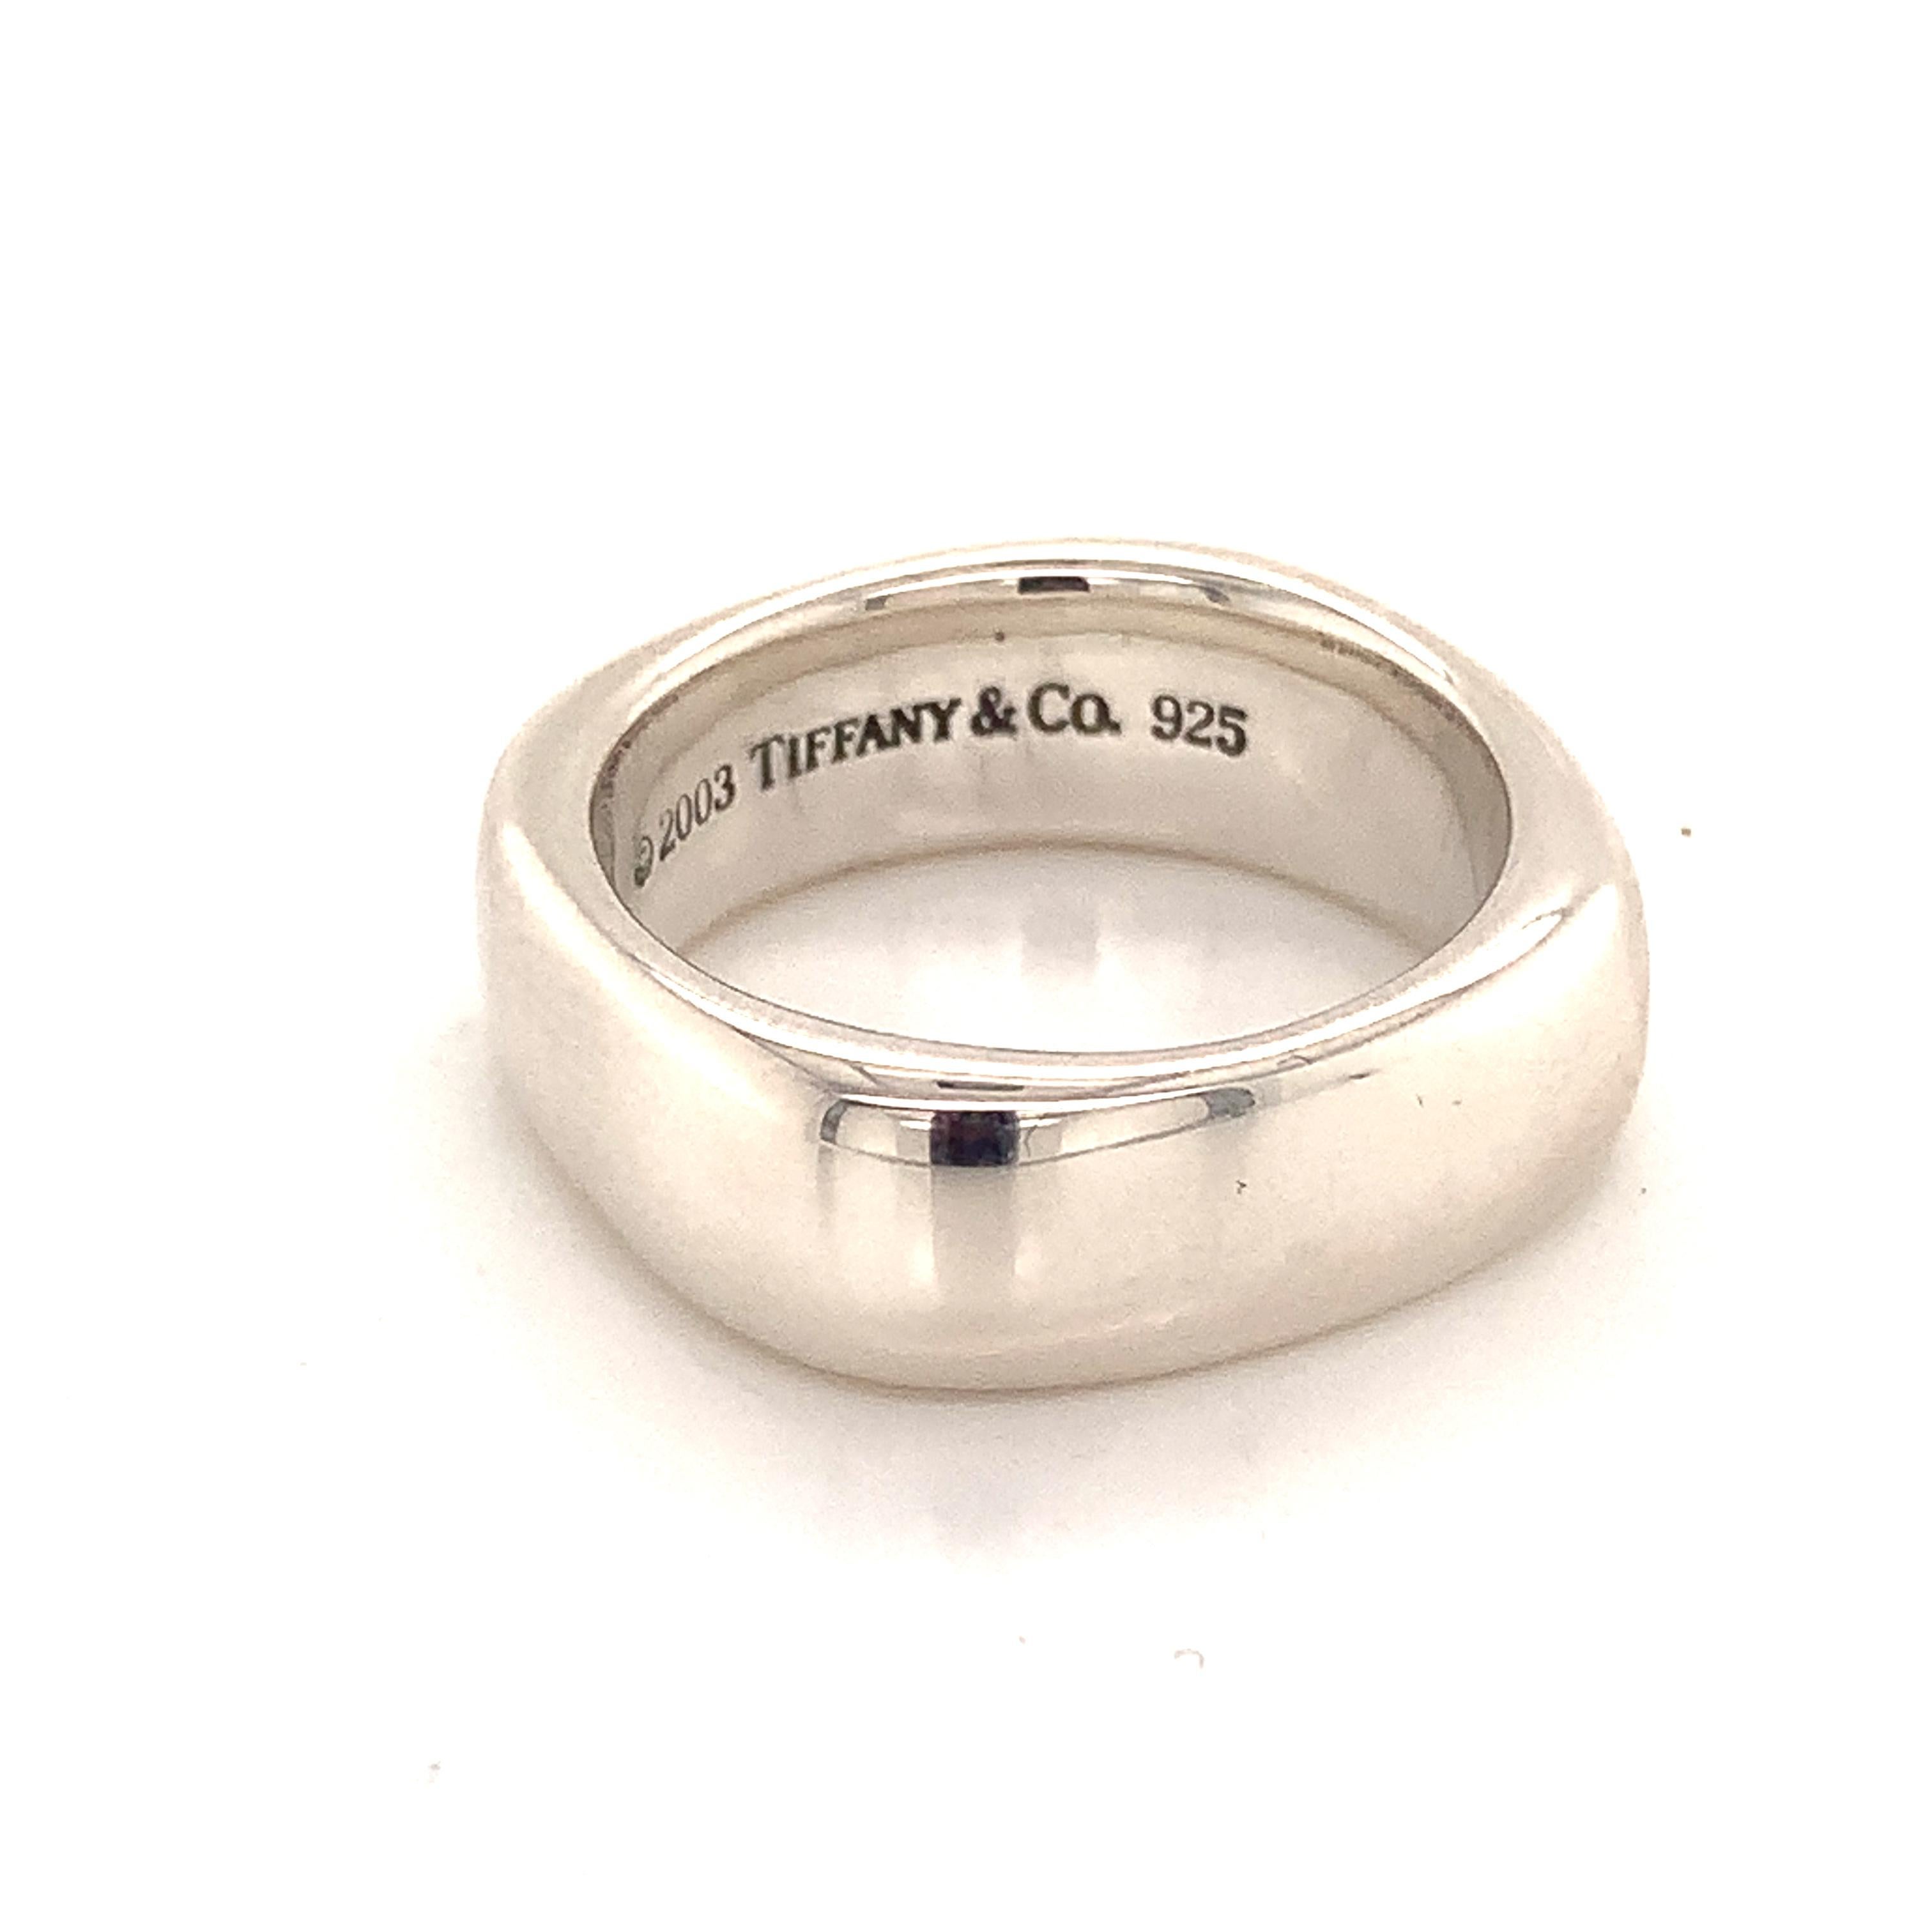 tiffany and co ring for men